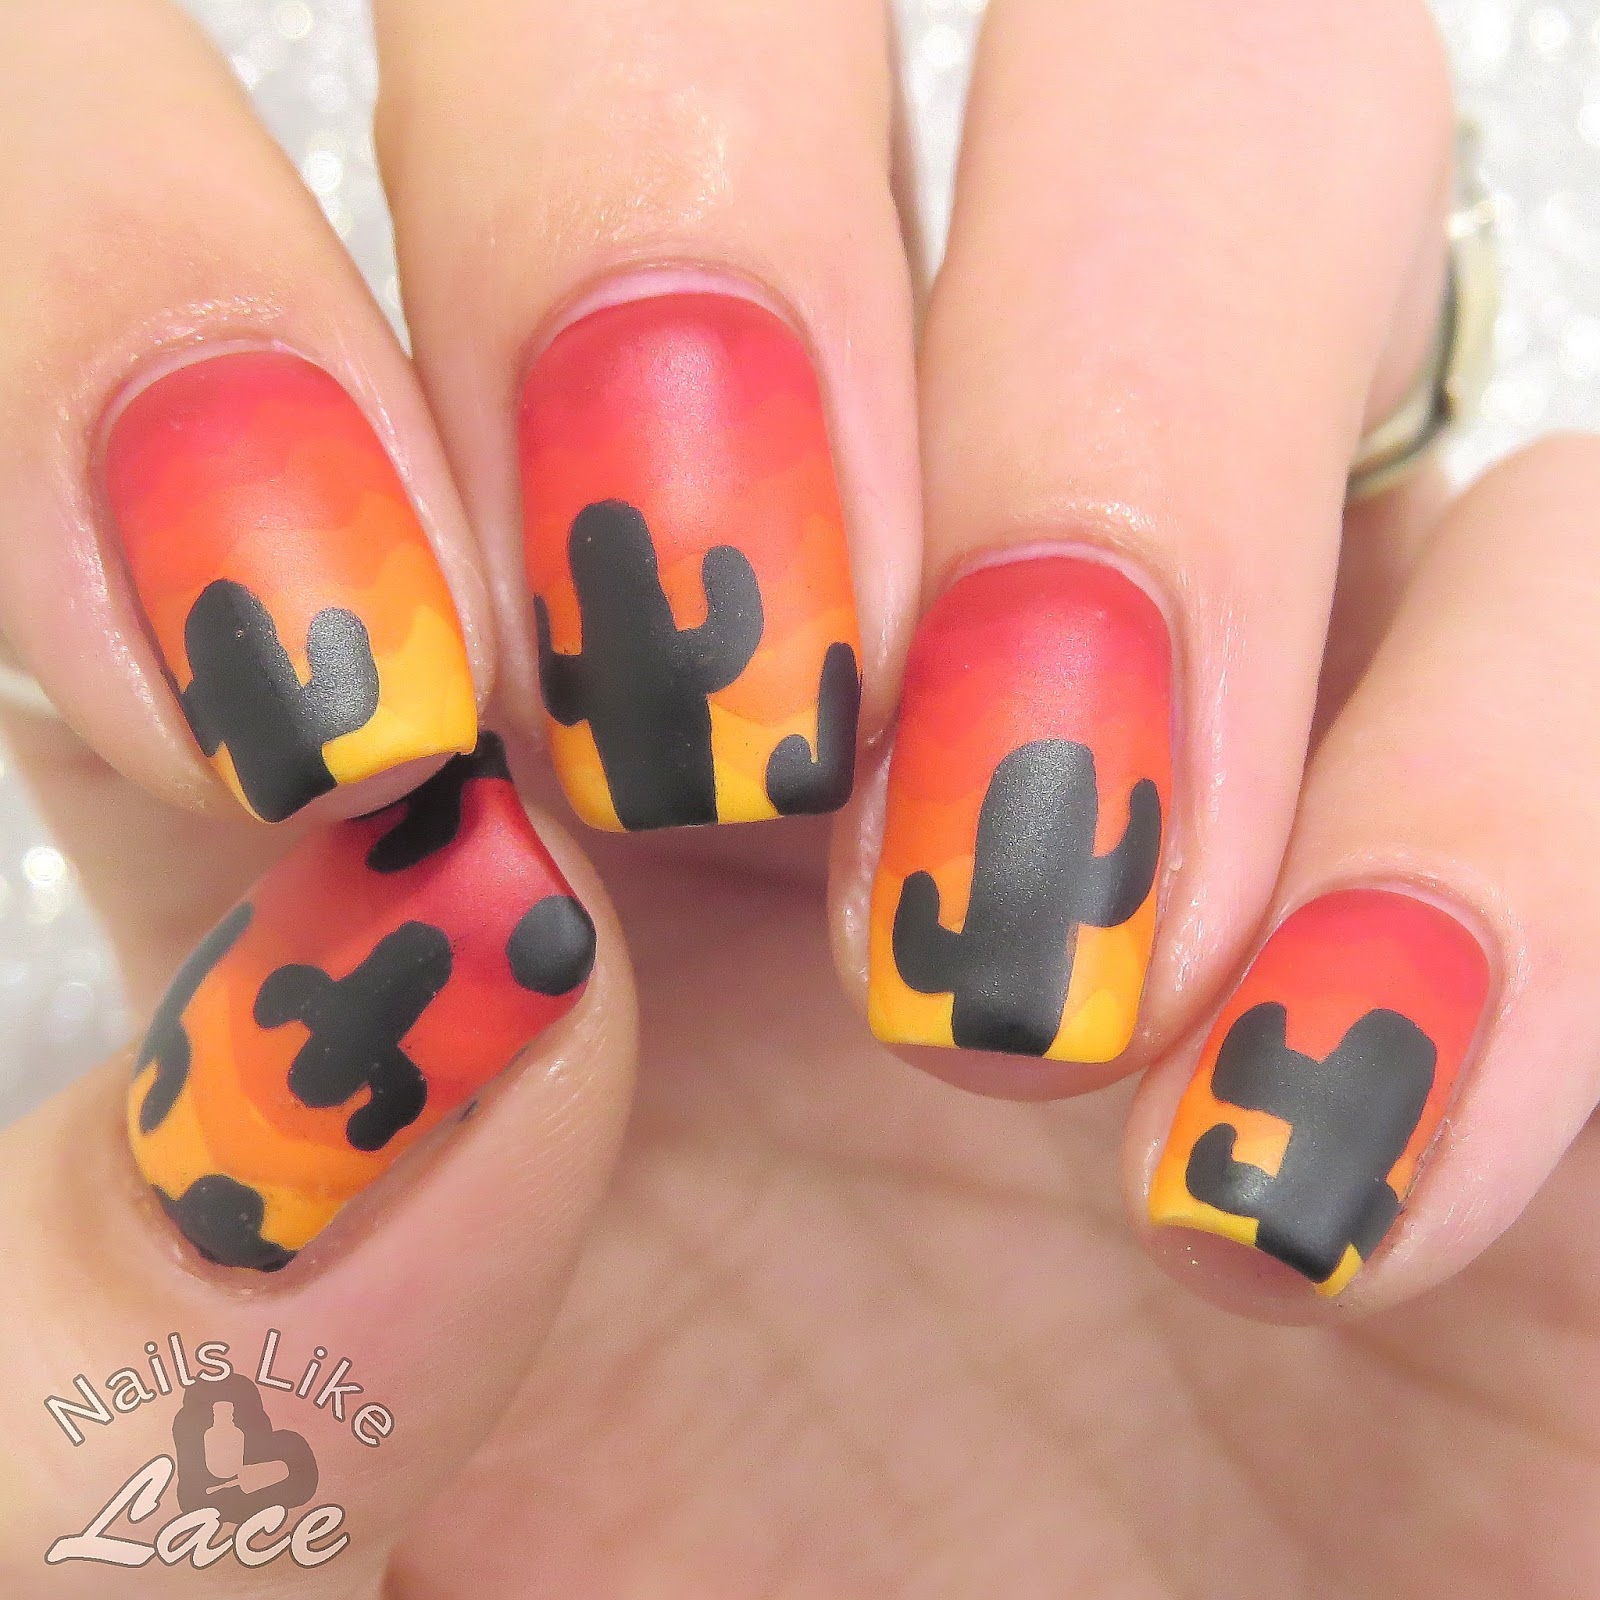 NailsLikeLace: 40 Great Nail Art Ideas: Red & Orange Zigzags with Cacti